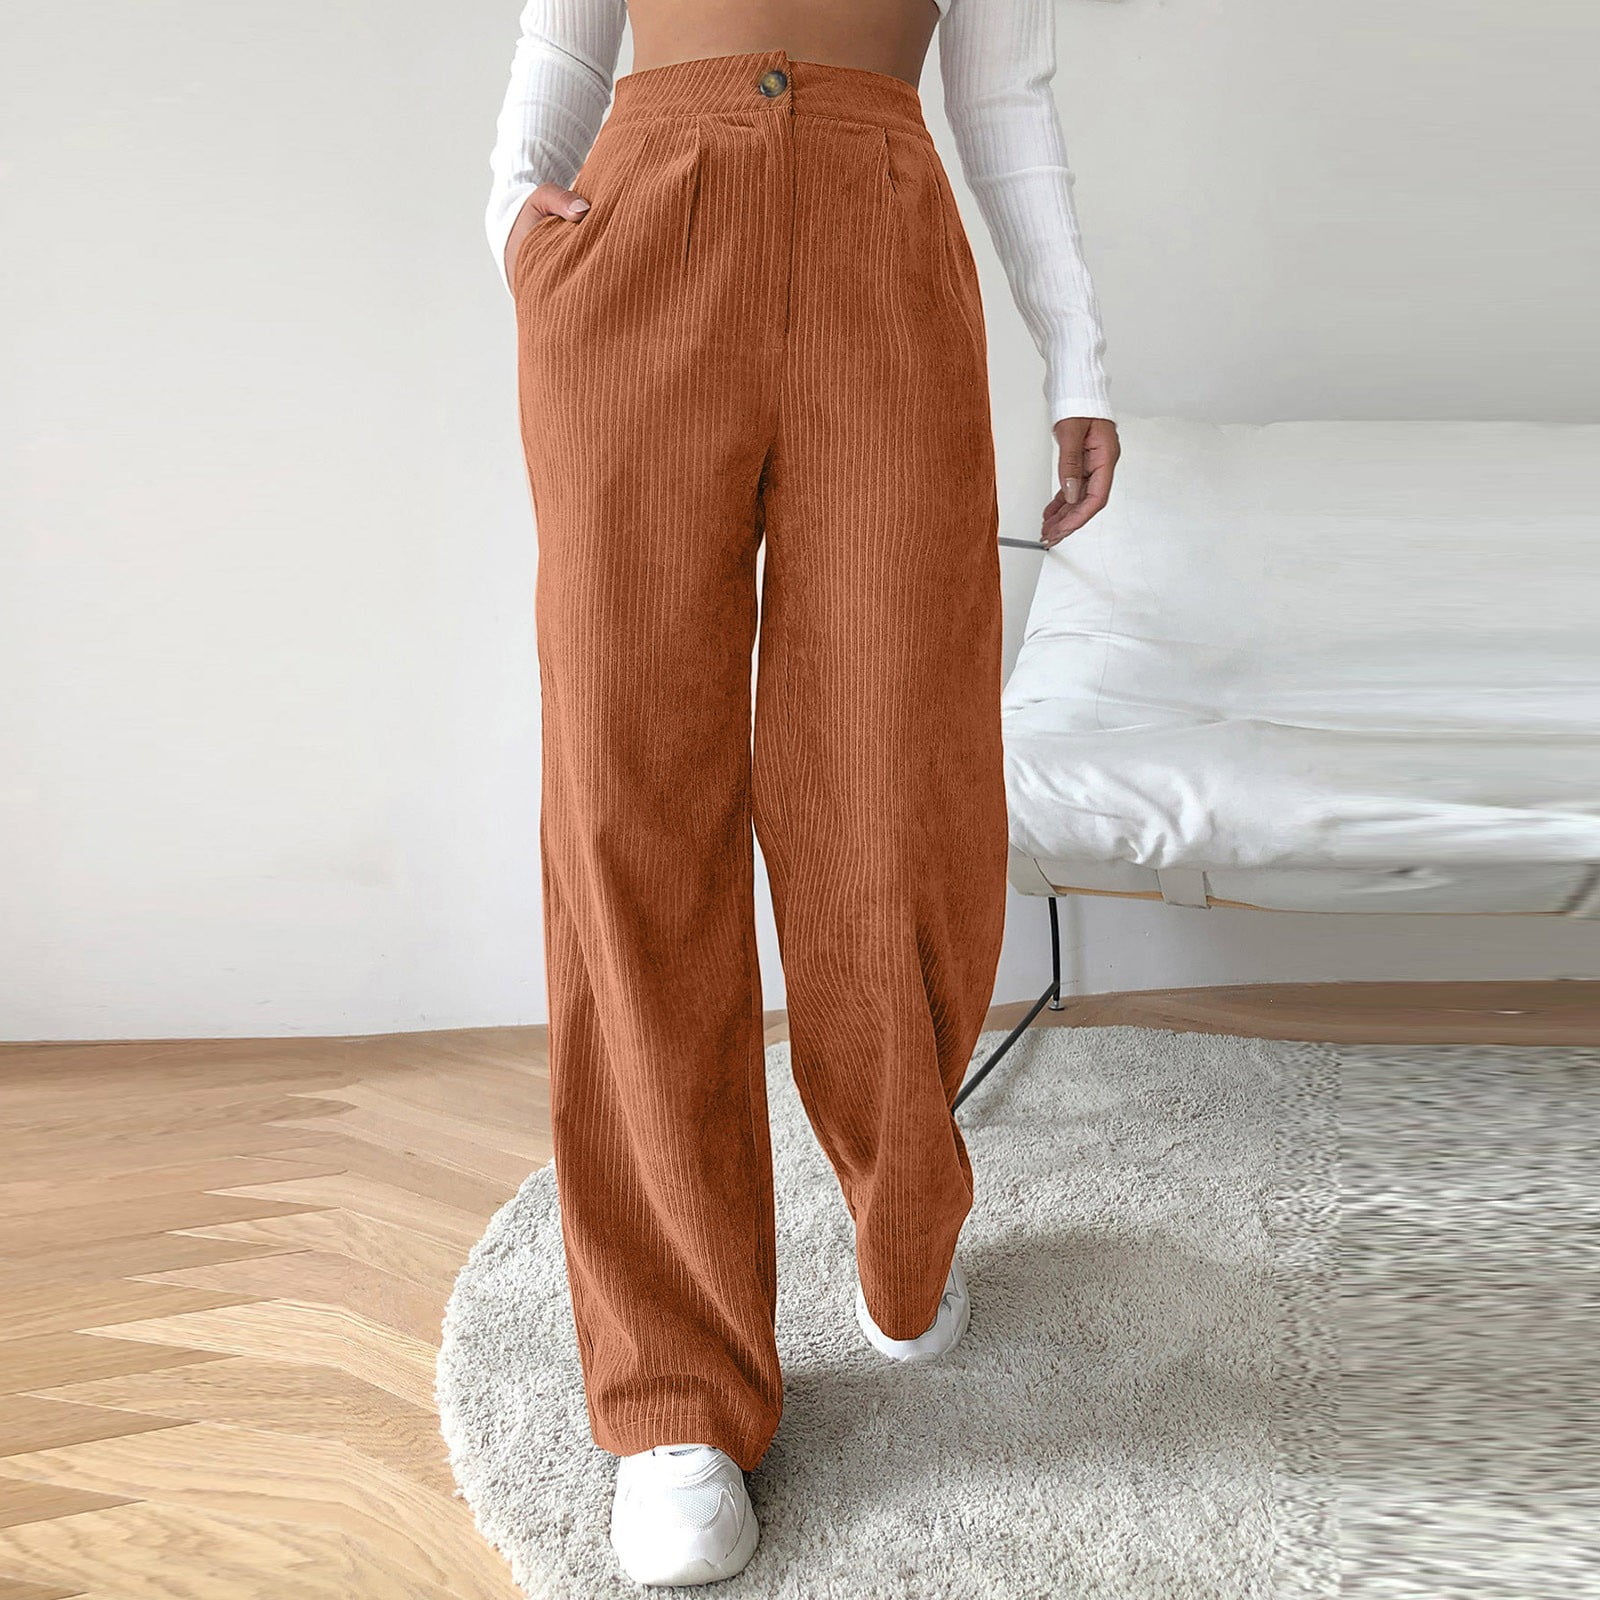 NILLLY Pants Women, Women's Solid Wide Leg Pants Casual Straight